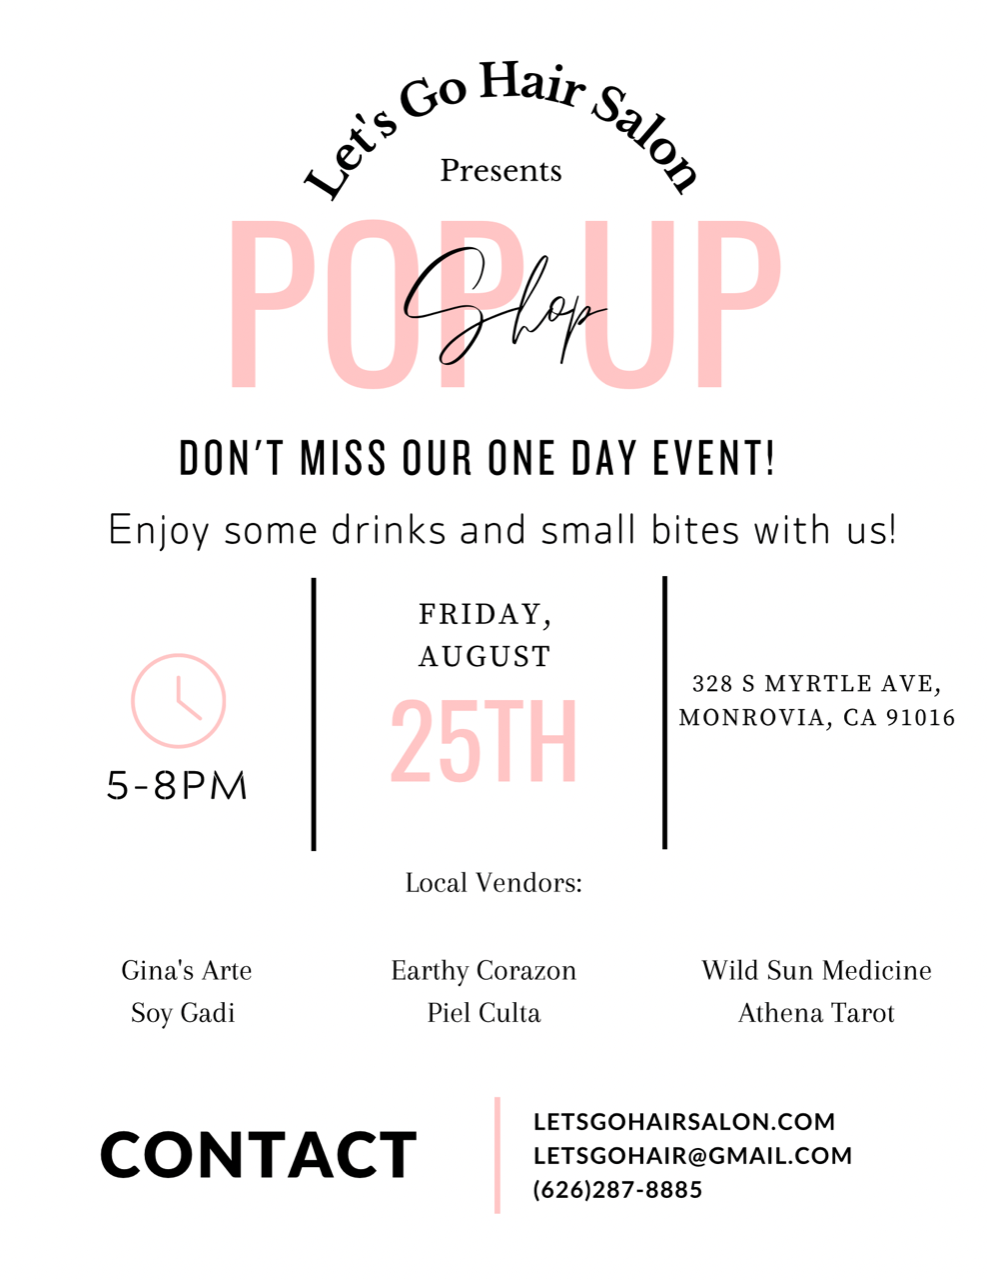 Pop Up event for Let's Go Hair Salon on Friday, August 25